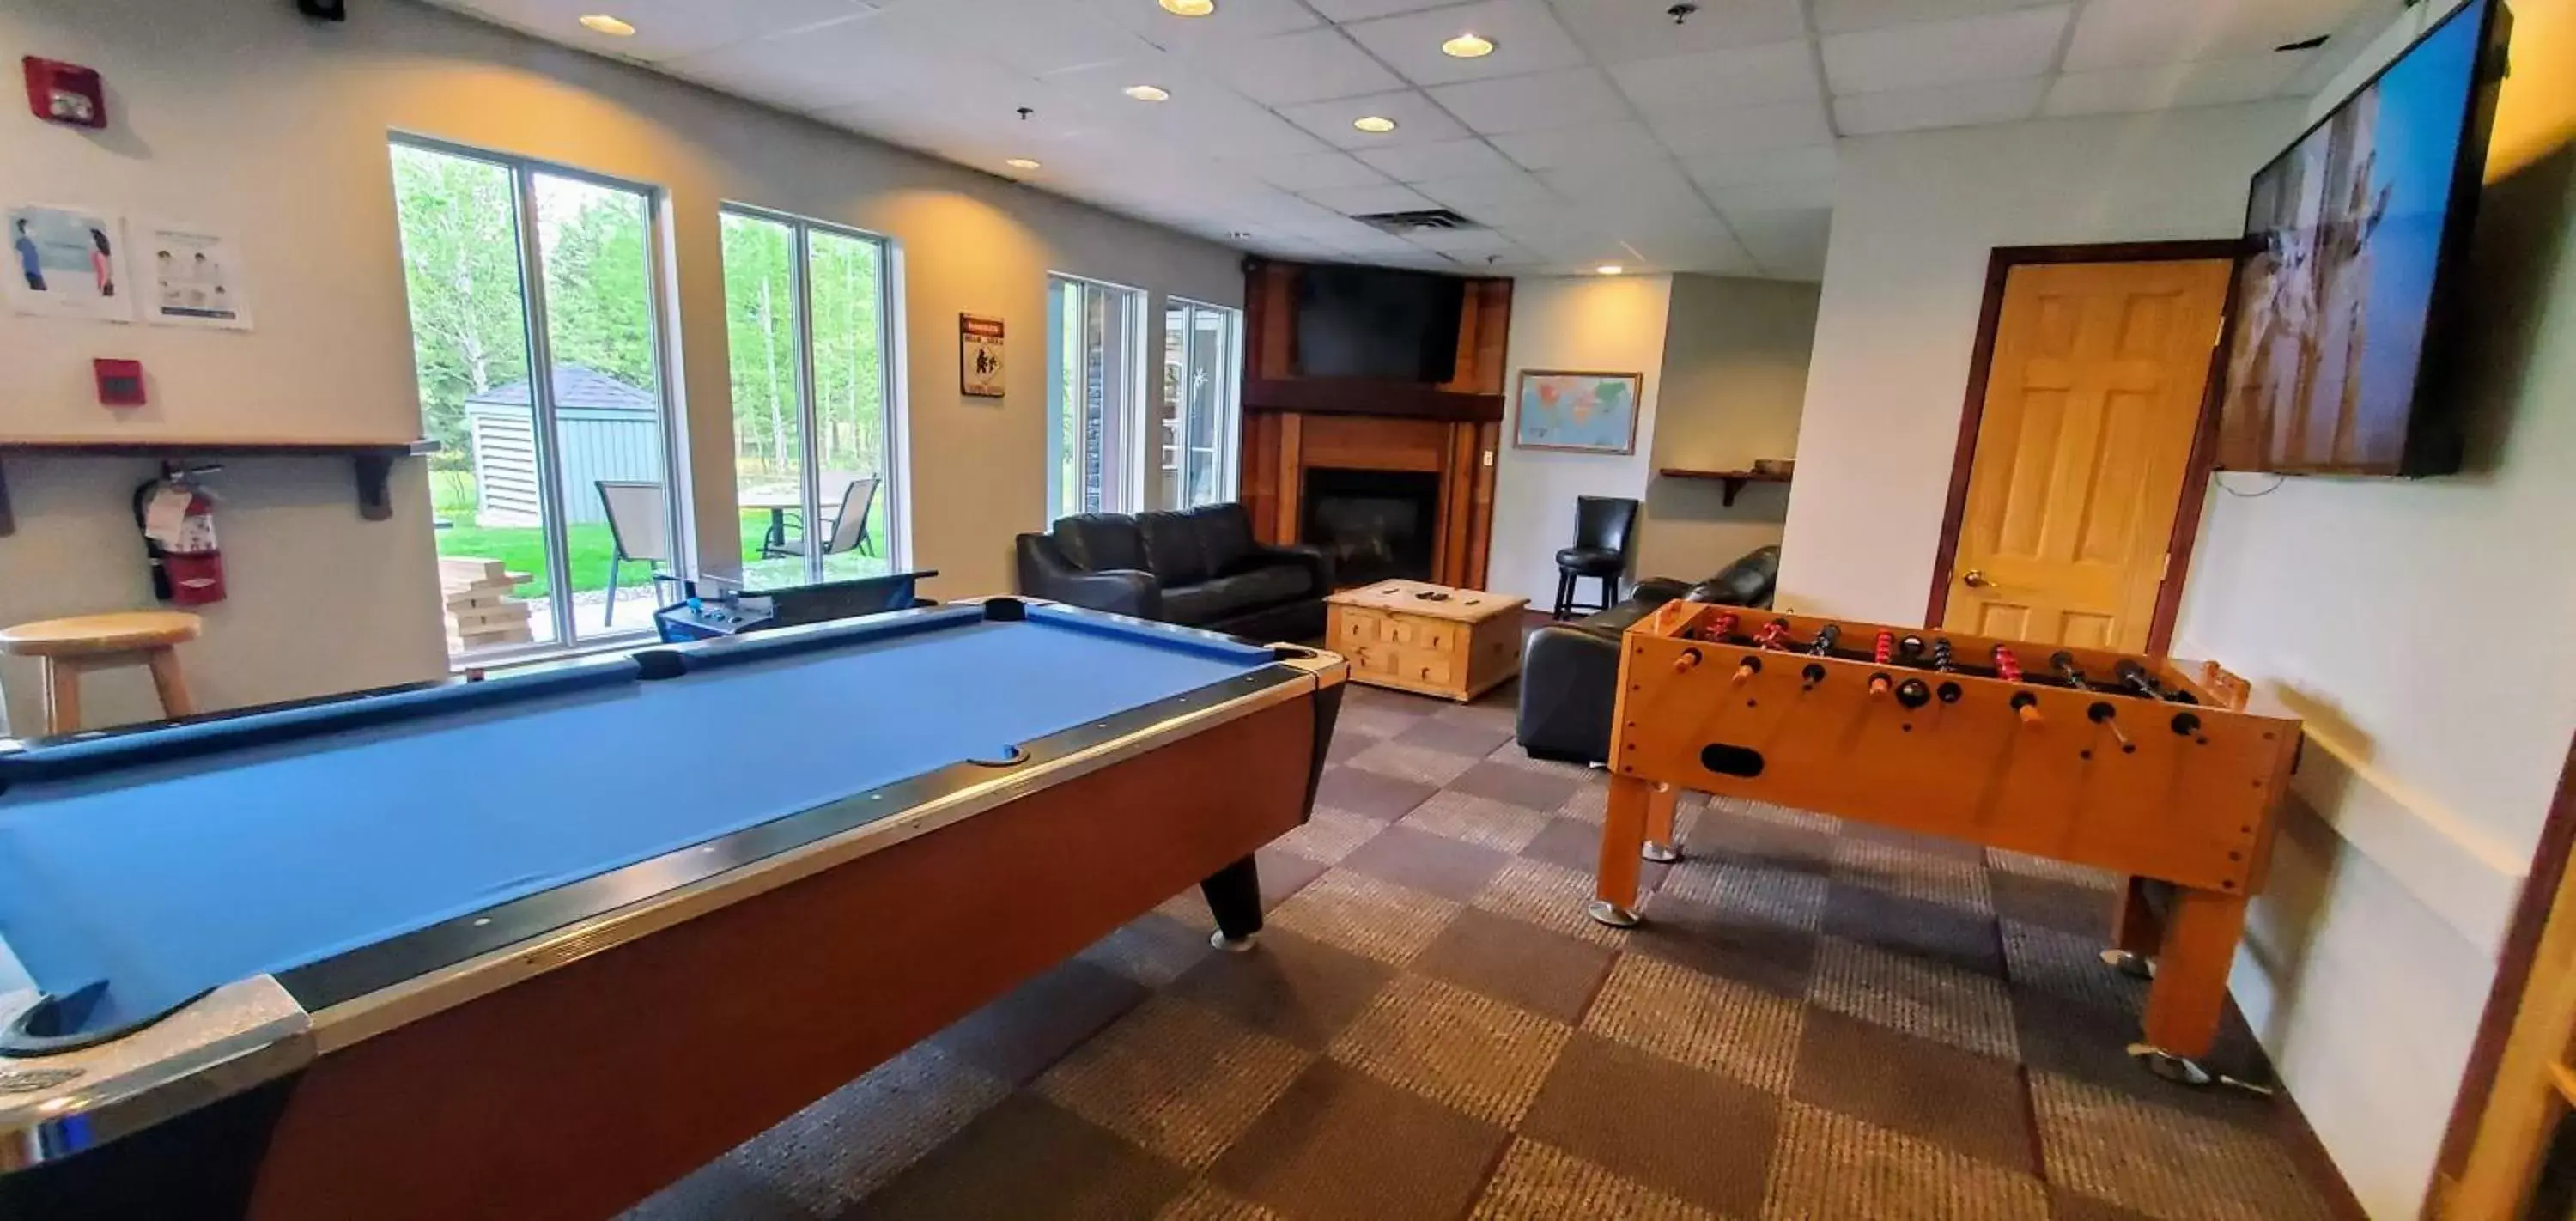 Game Room, Billiards in Paradise Resort Club and Spa